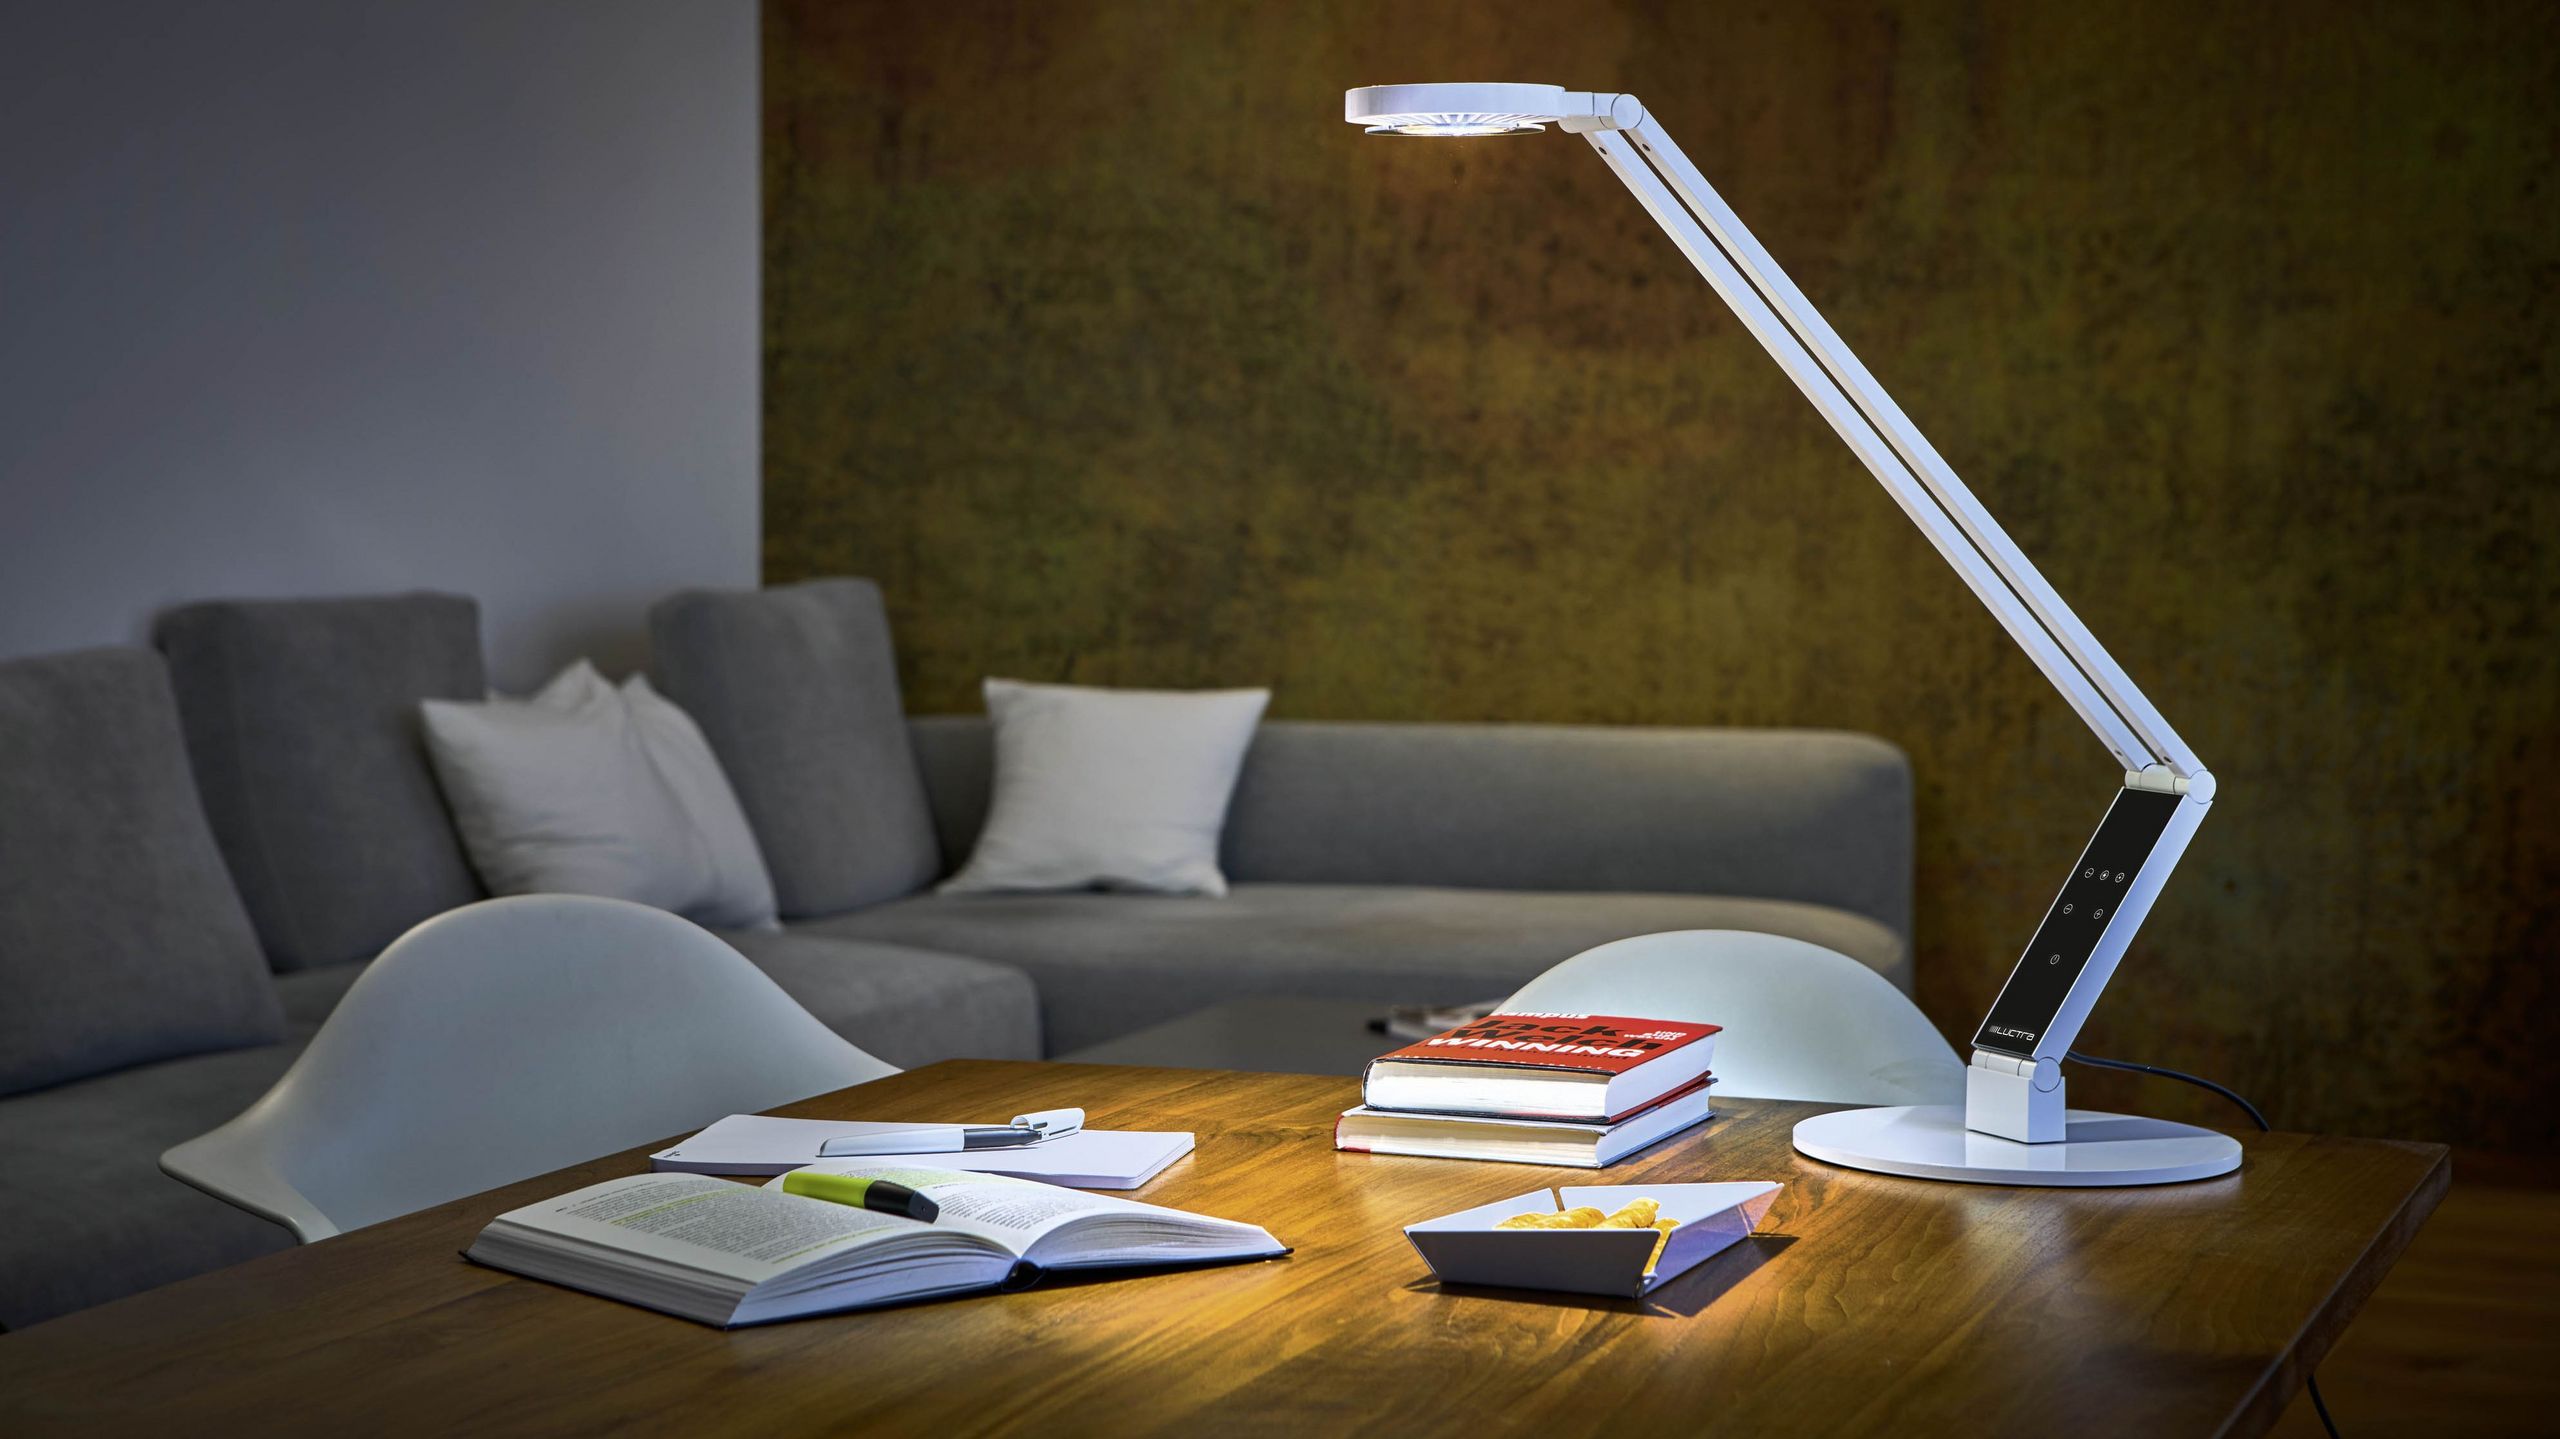 Lampadaire LED VITAWORK® 7 Luctra